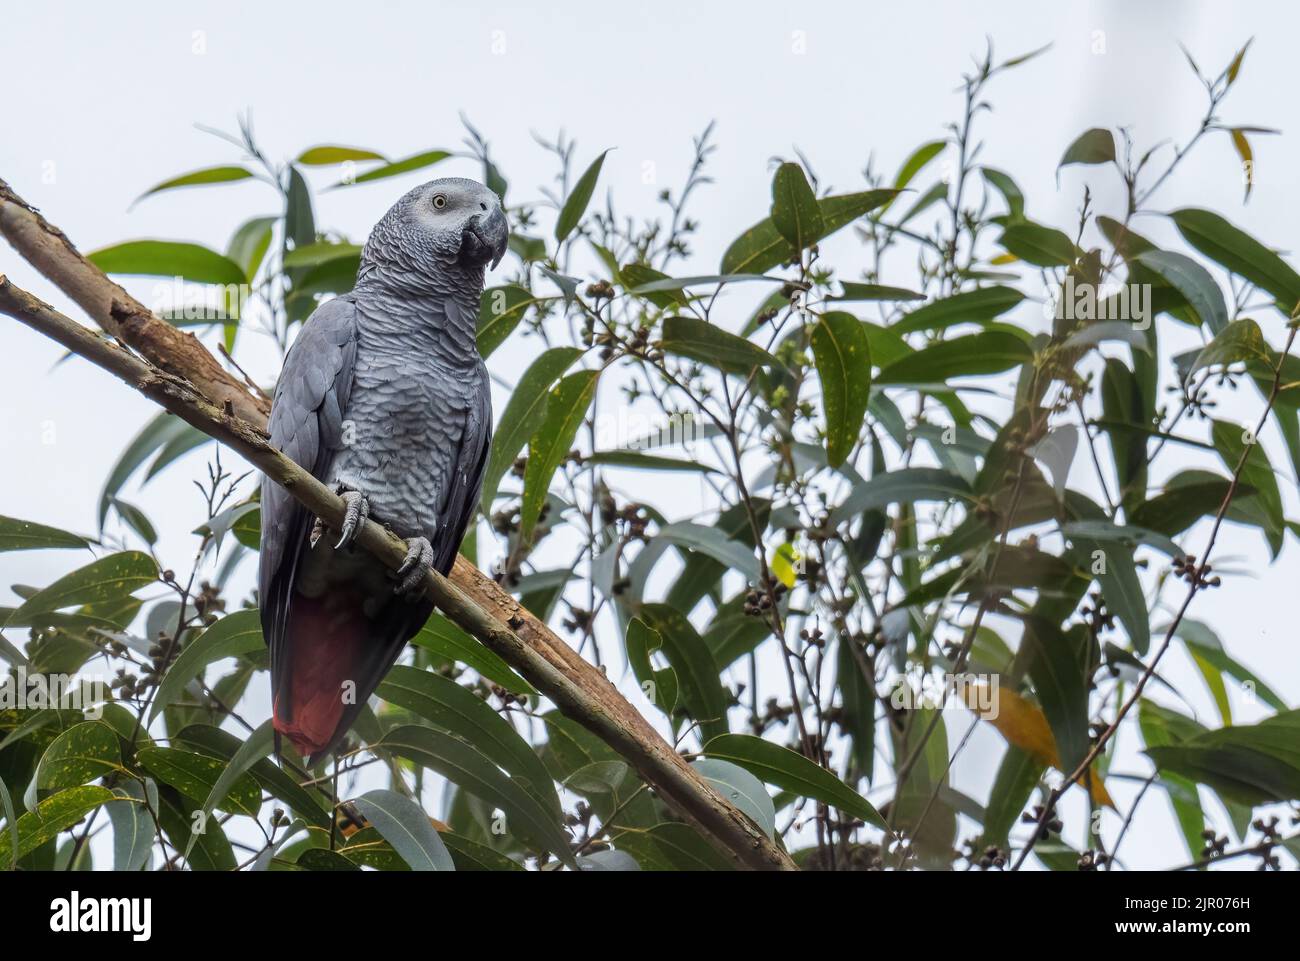 African Grey Parrot - Psittacus erithacus, beautiful large parrot from Central Africa forests and woodlands, popular pet, Uganda. Stock Photo